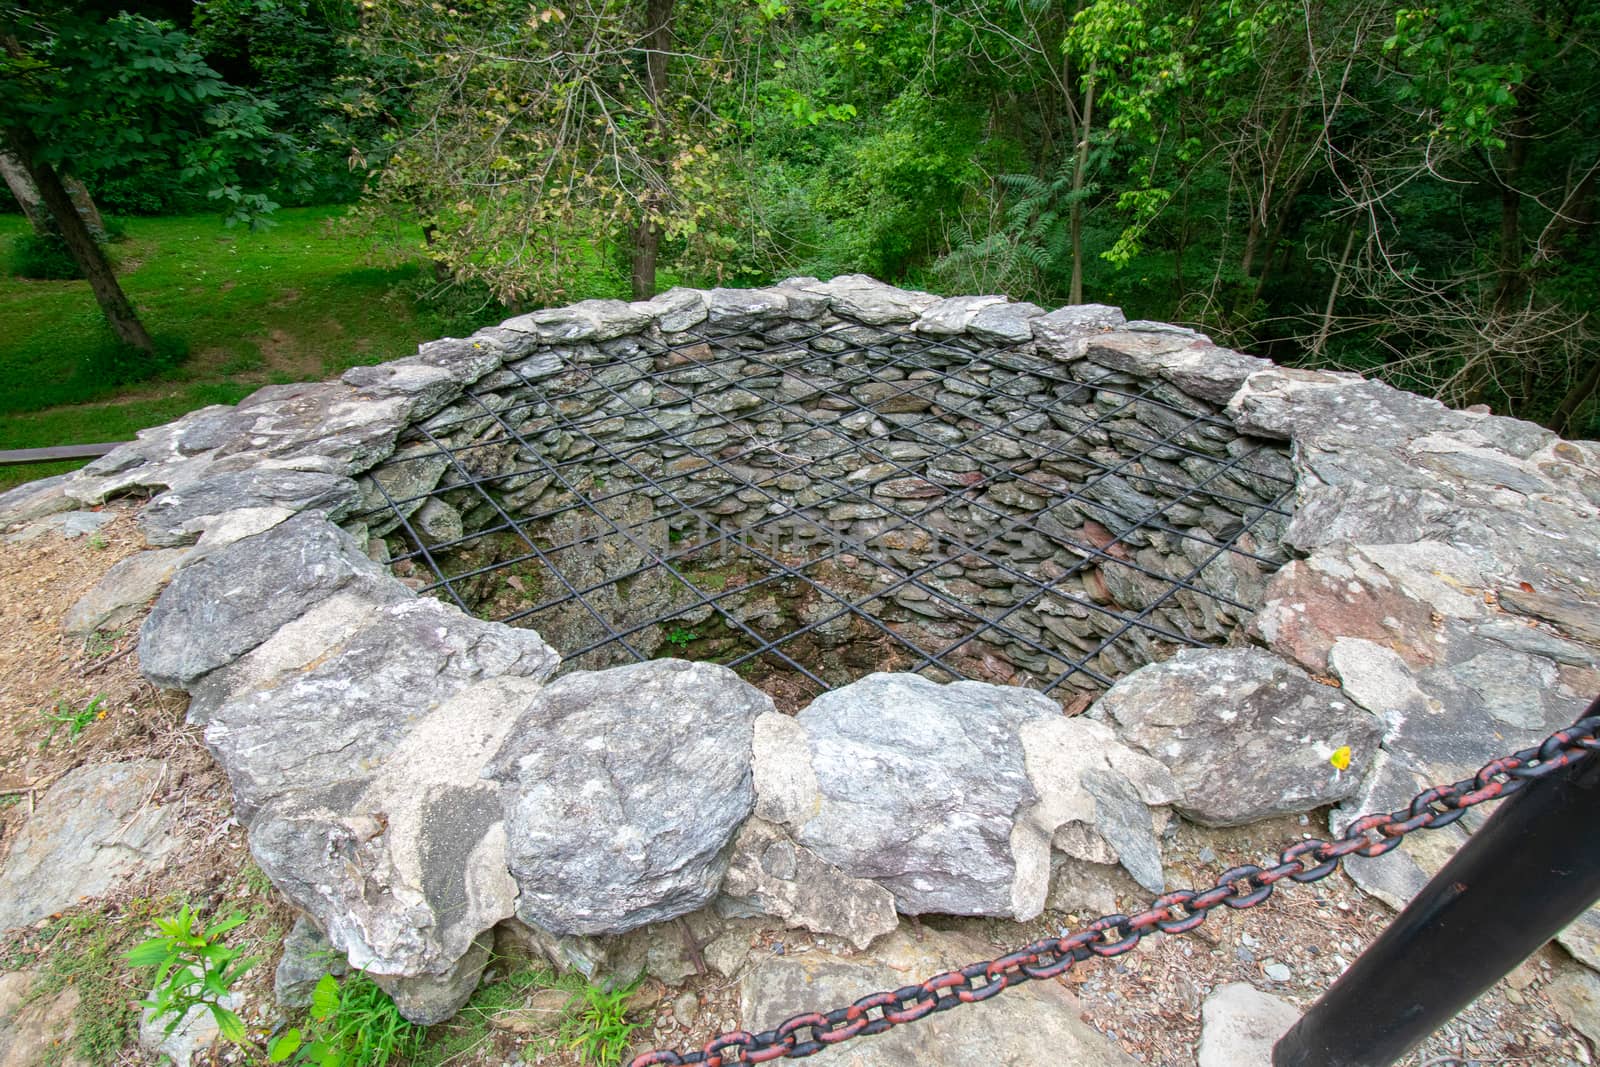 A Large Hole With Cobblestone Walls and a Metal Covering Over the Top at the Historic Lock 12 in Pennsylvania